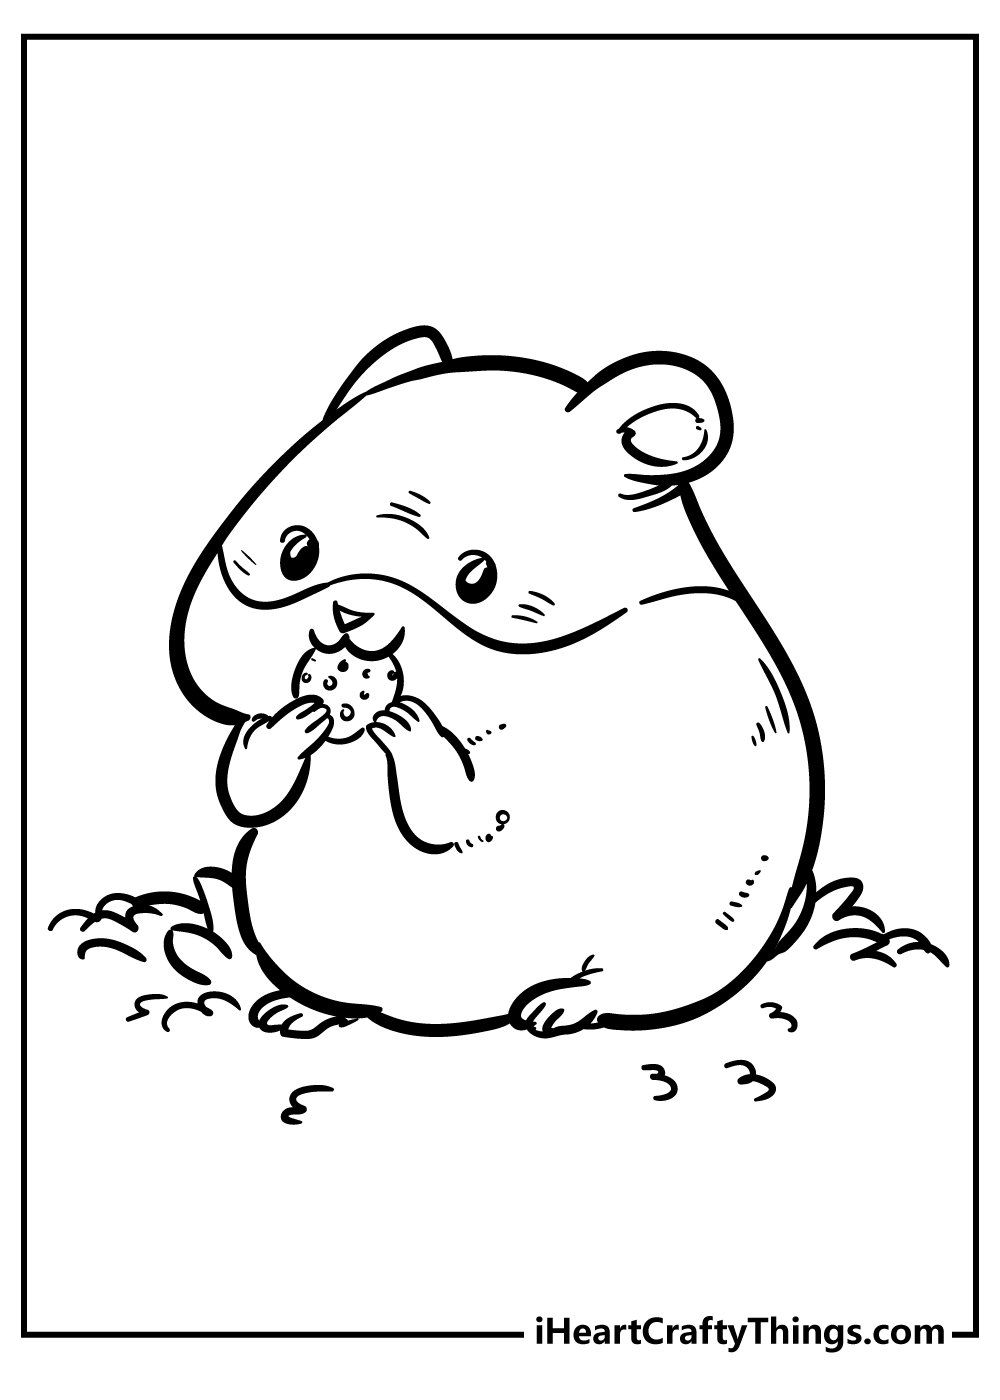 Hamster coloring pages free printables